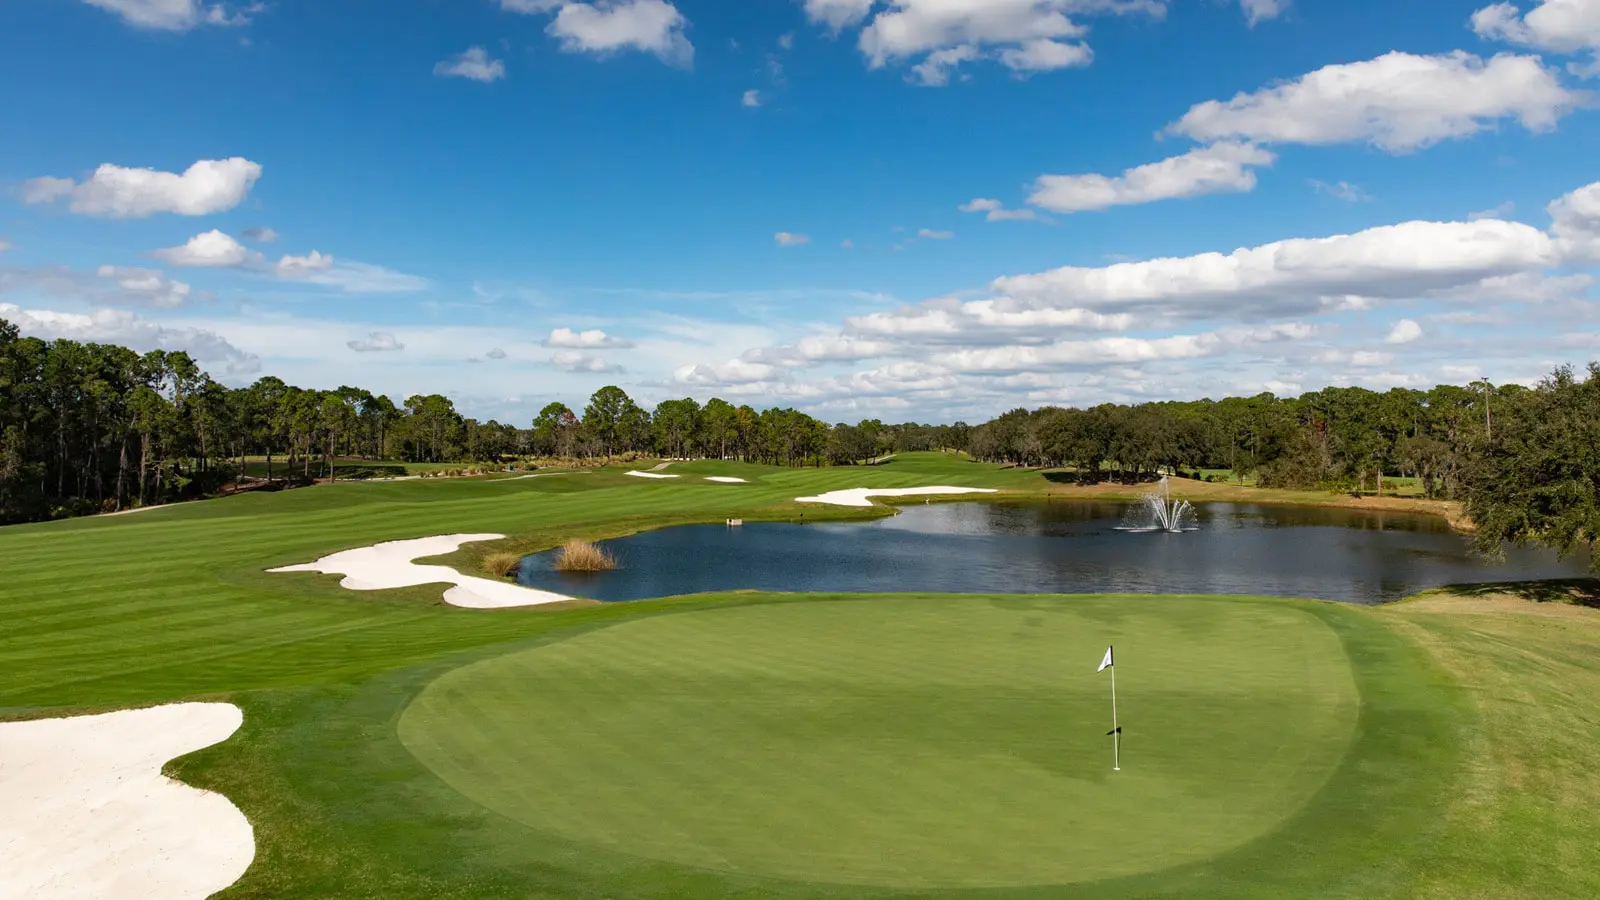 Four seasons golf and sports club orlando provides the ultimate escape